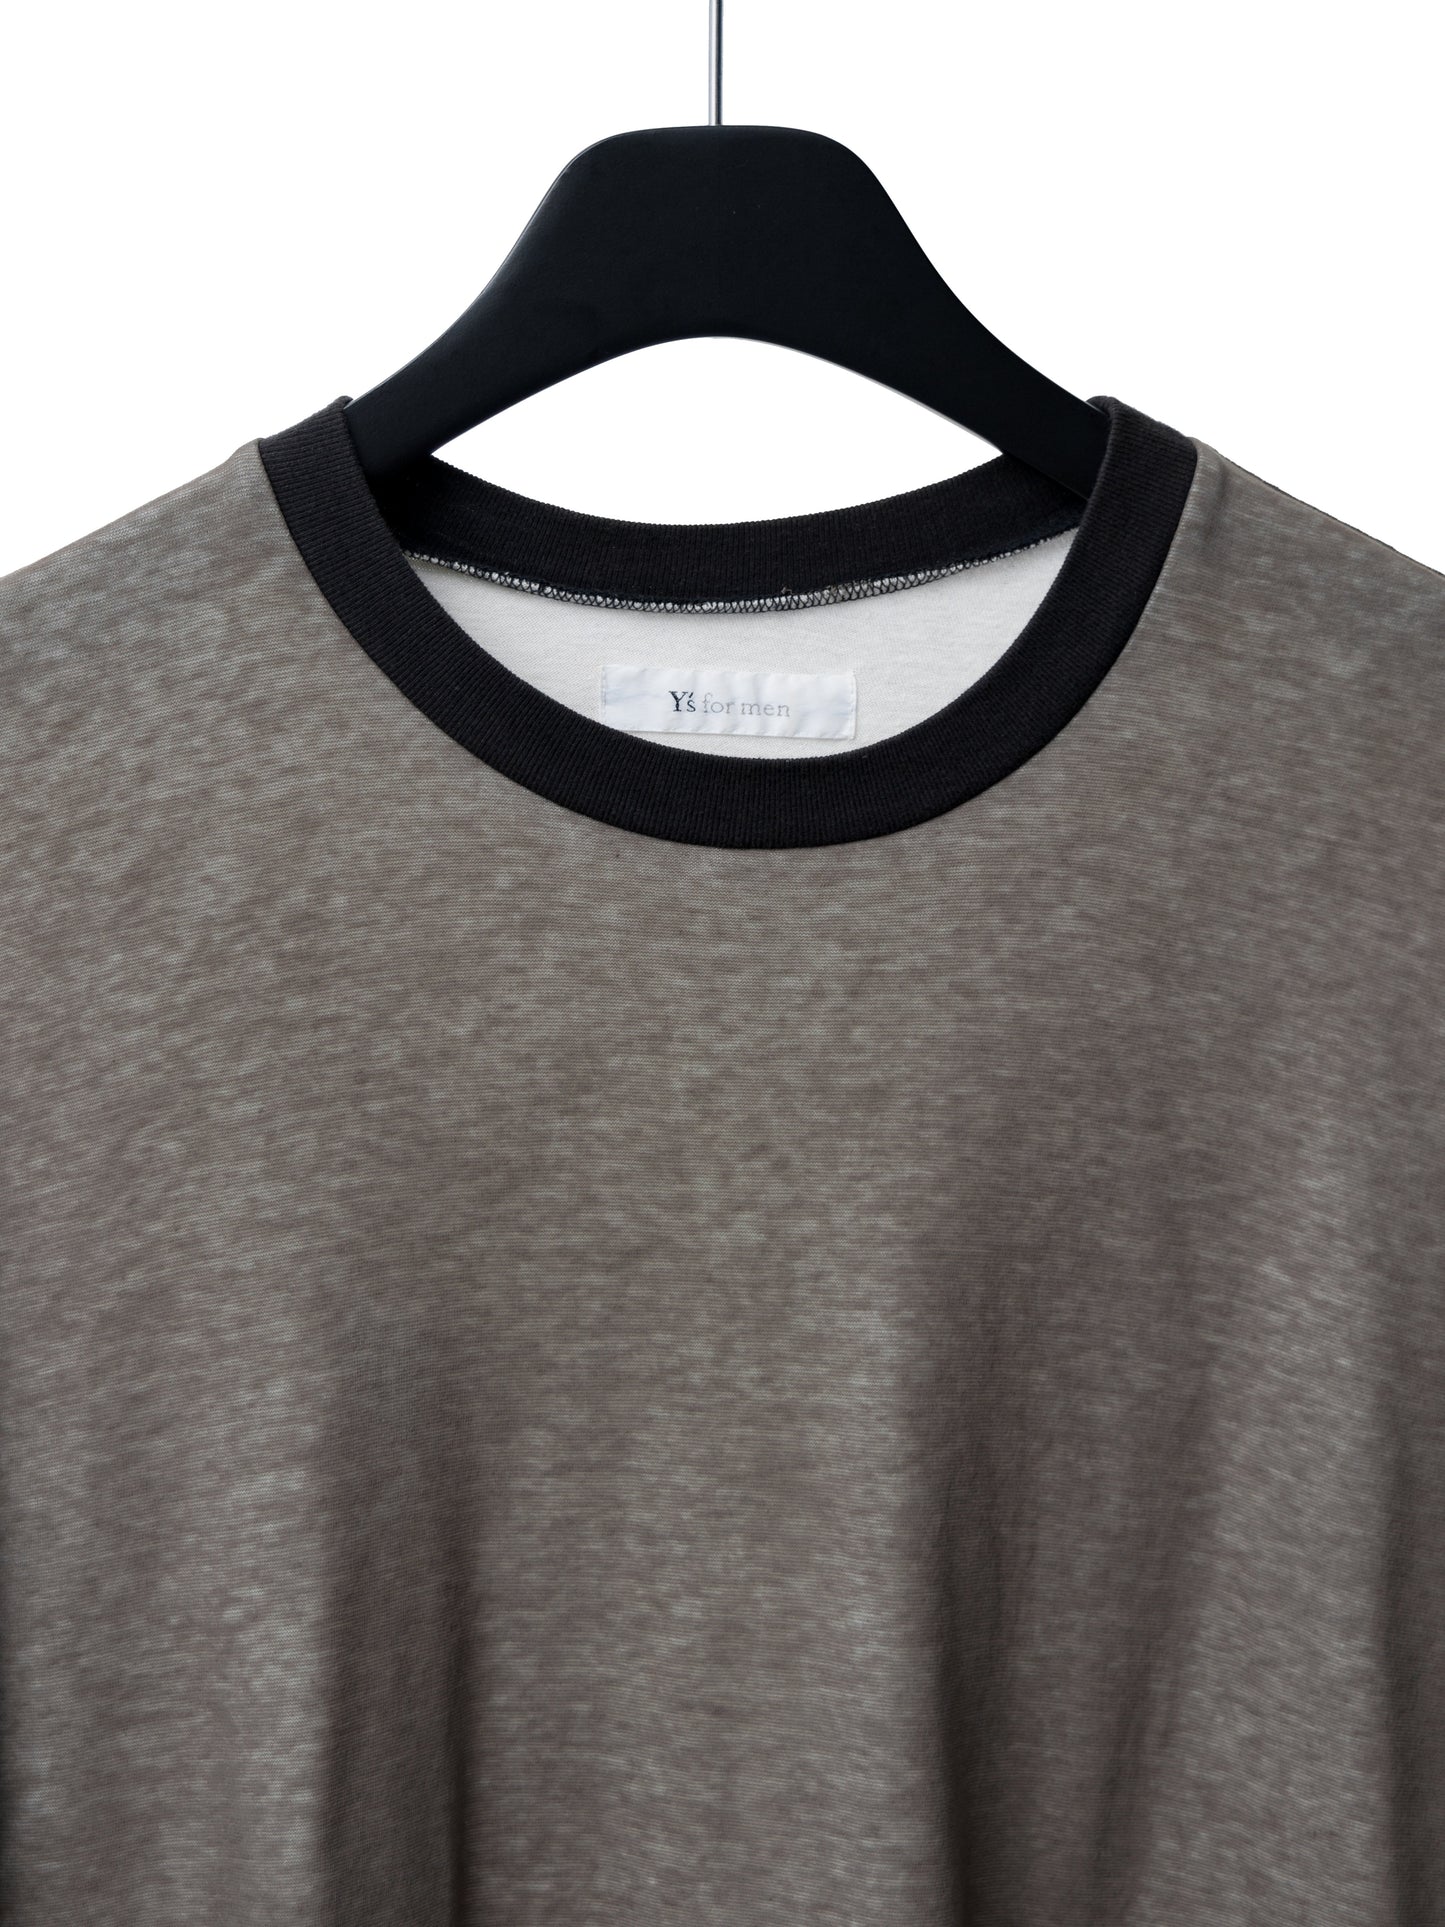 double layer tee taupe ∙ cotton poly ∙ medium